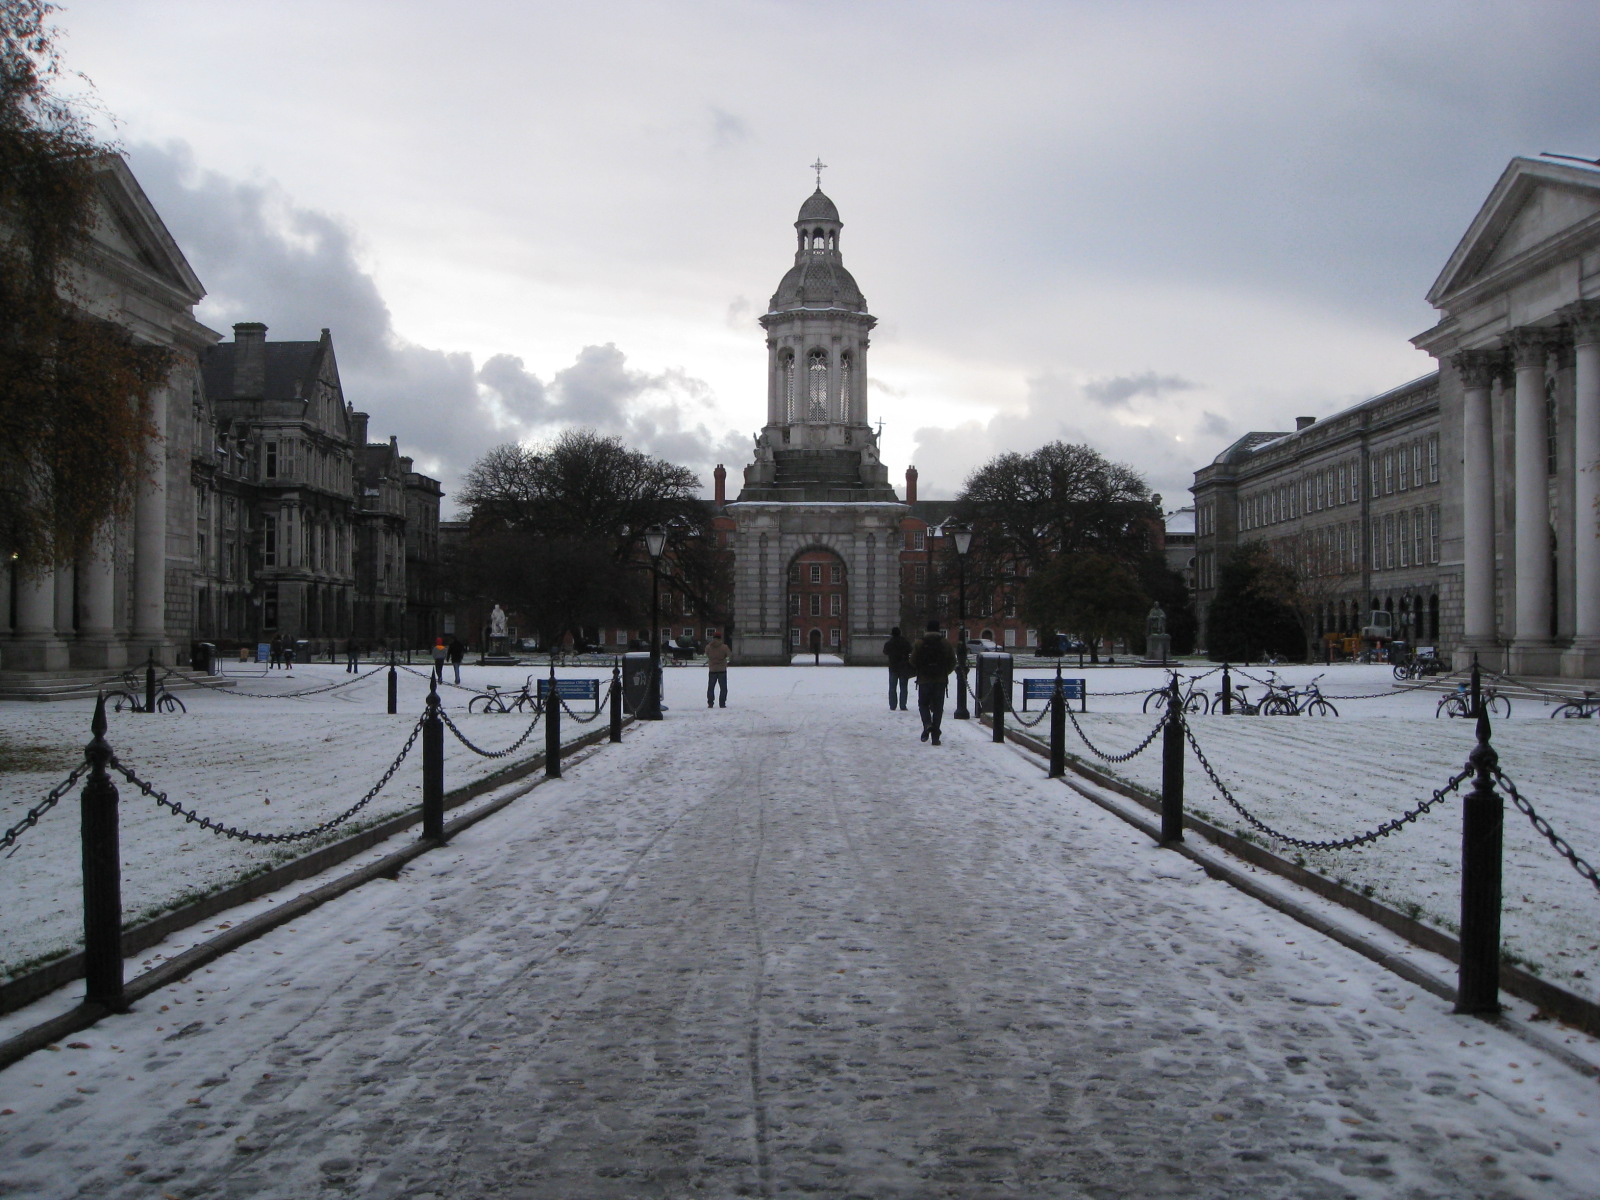 The iconic Trinity College shot of the College Campanile with the rarely seen addition of snow